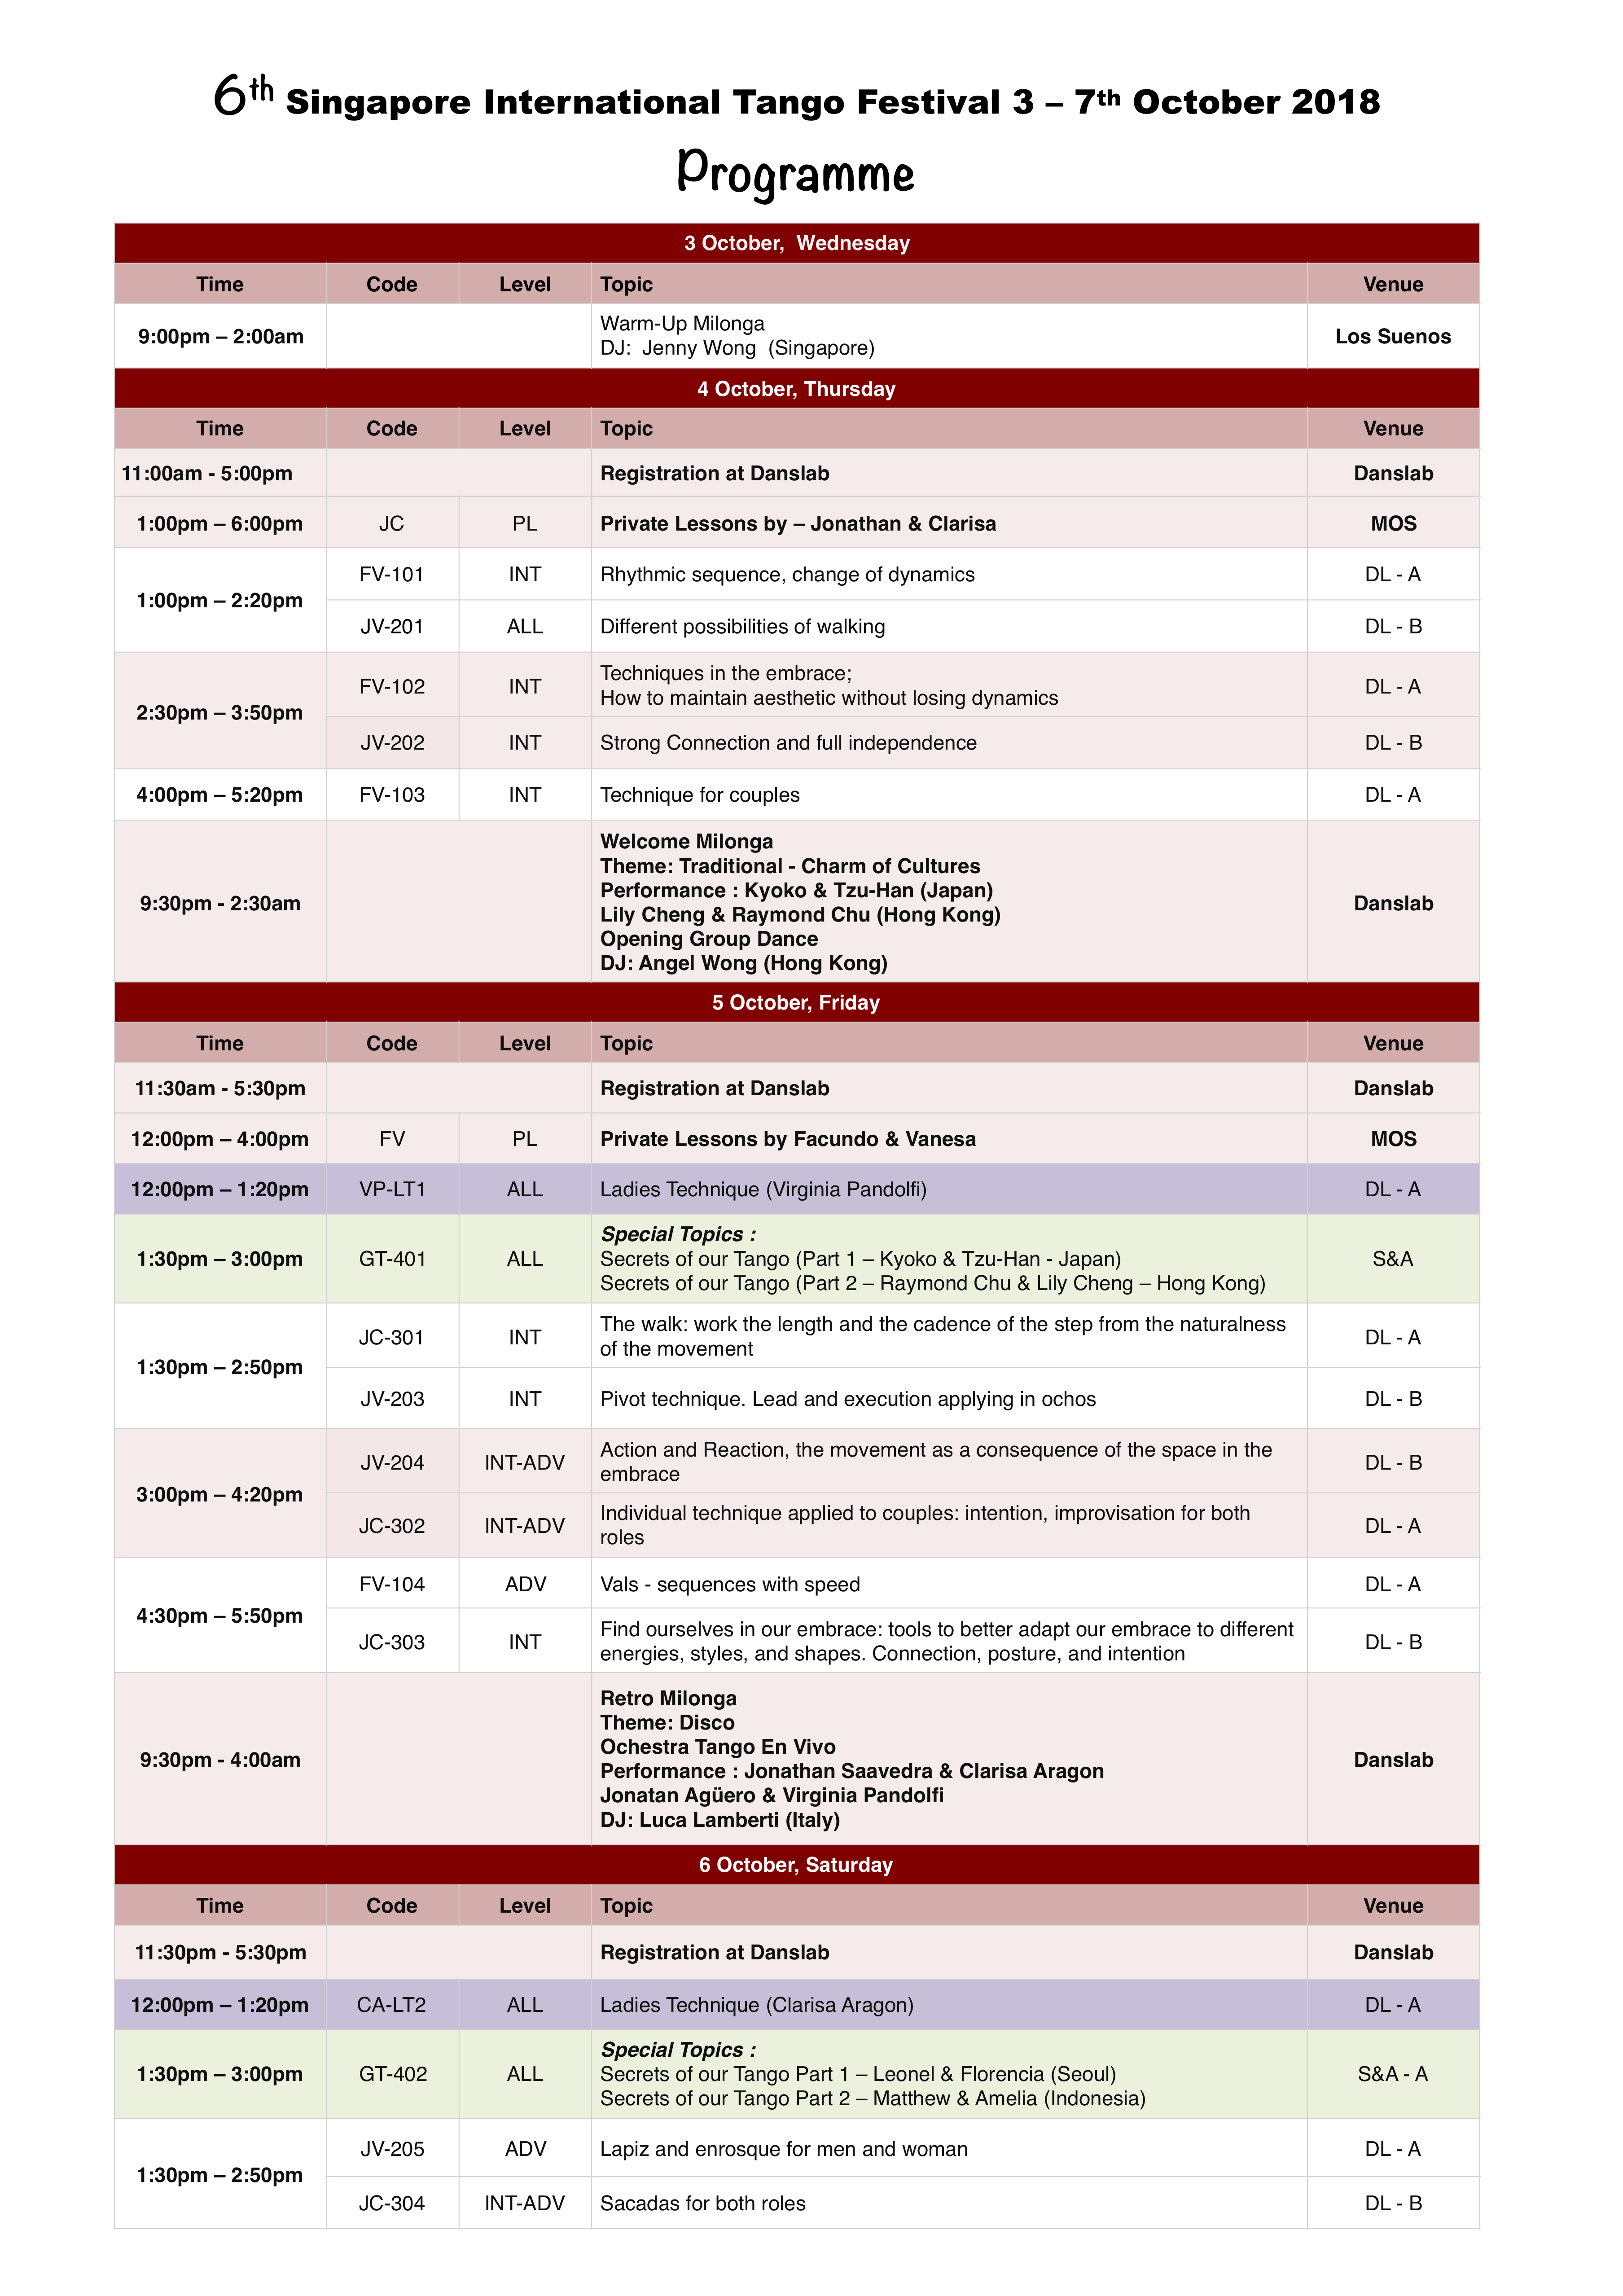 6th SITF - Programme & Schedule - 15th May 2018